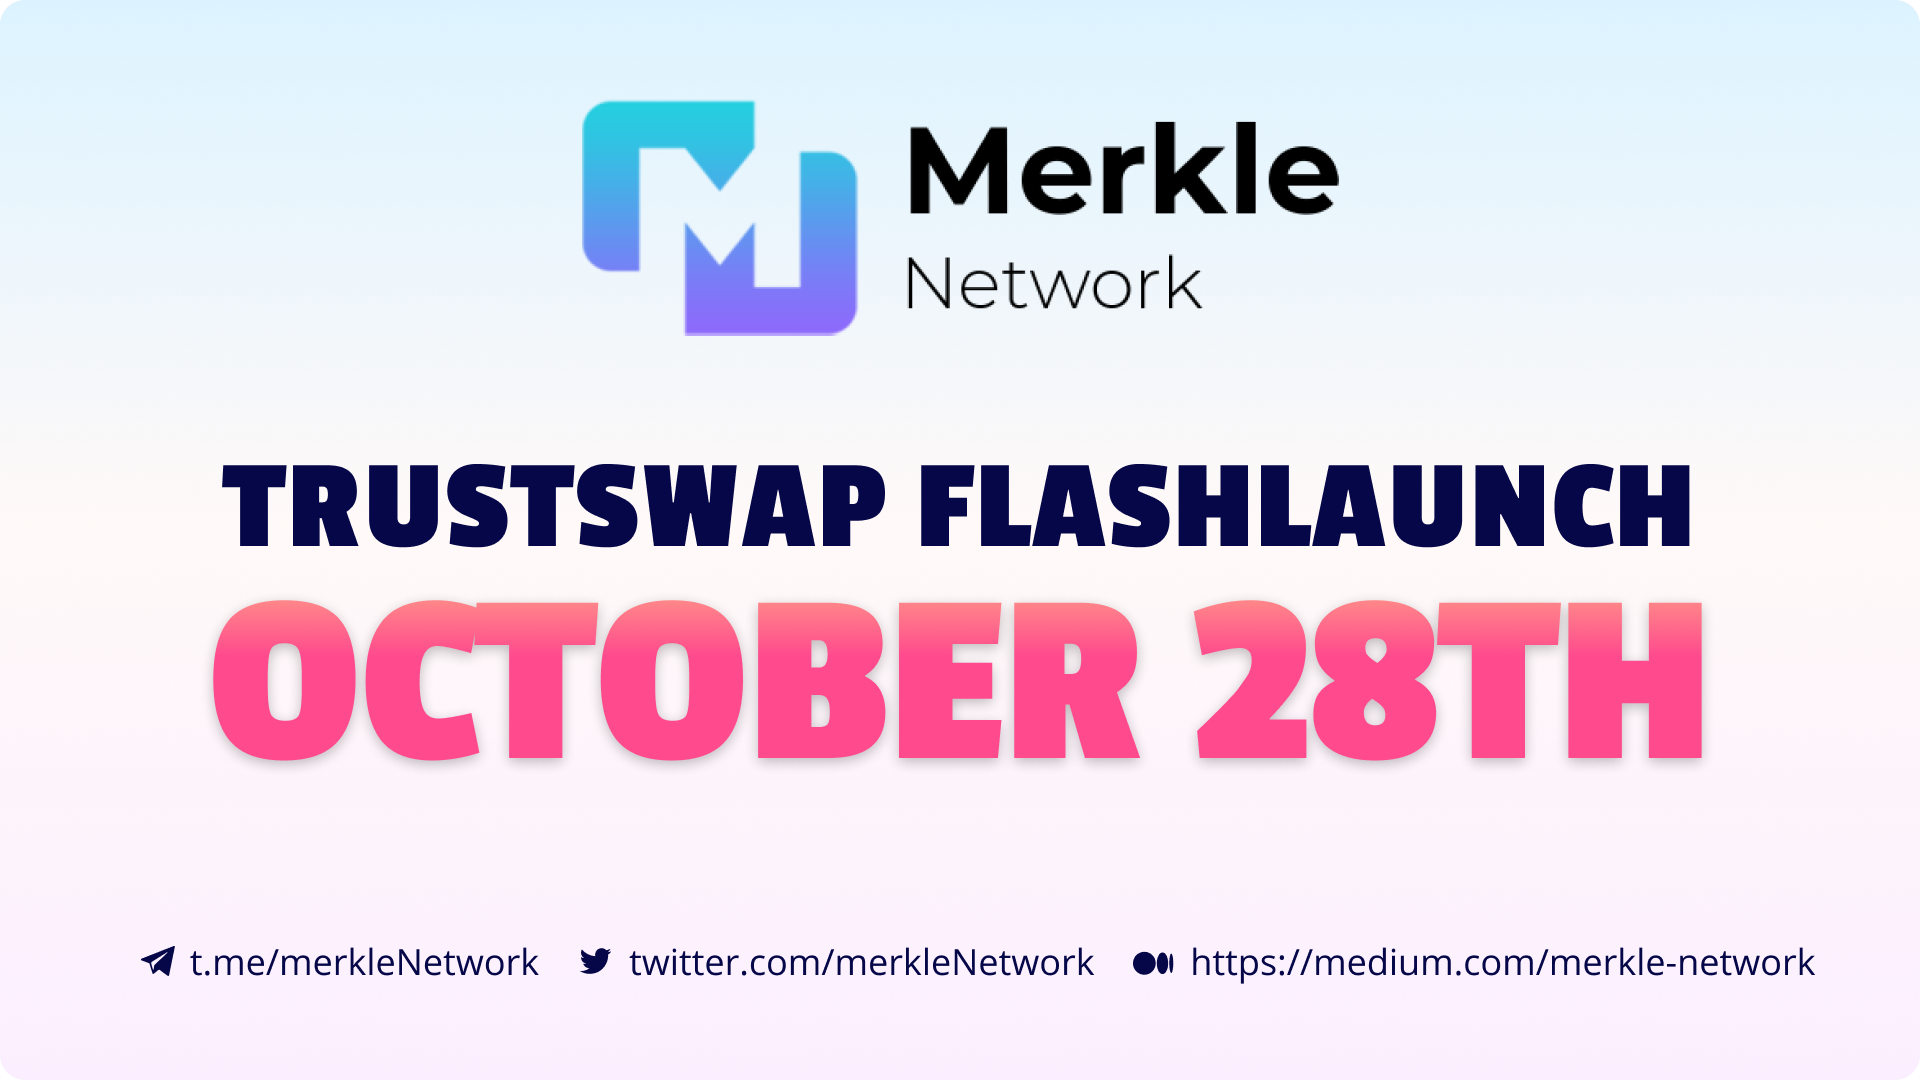 Merkle Network Announces FlashLaunch with TrustSwap on October 28th